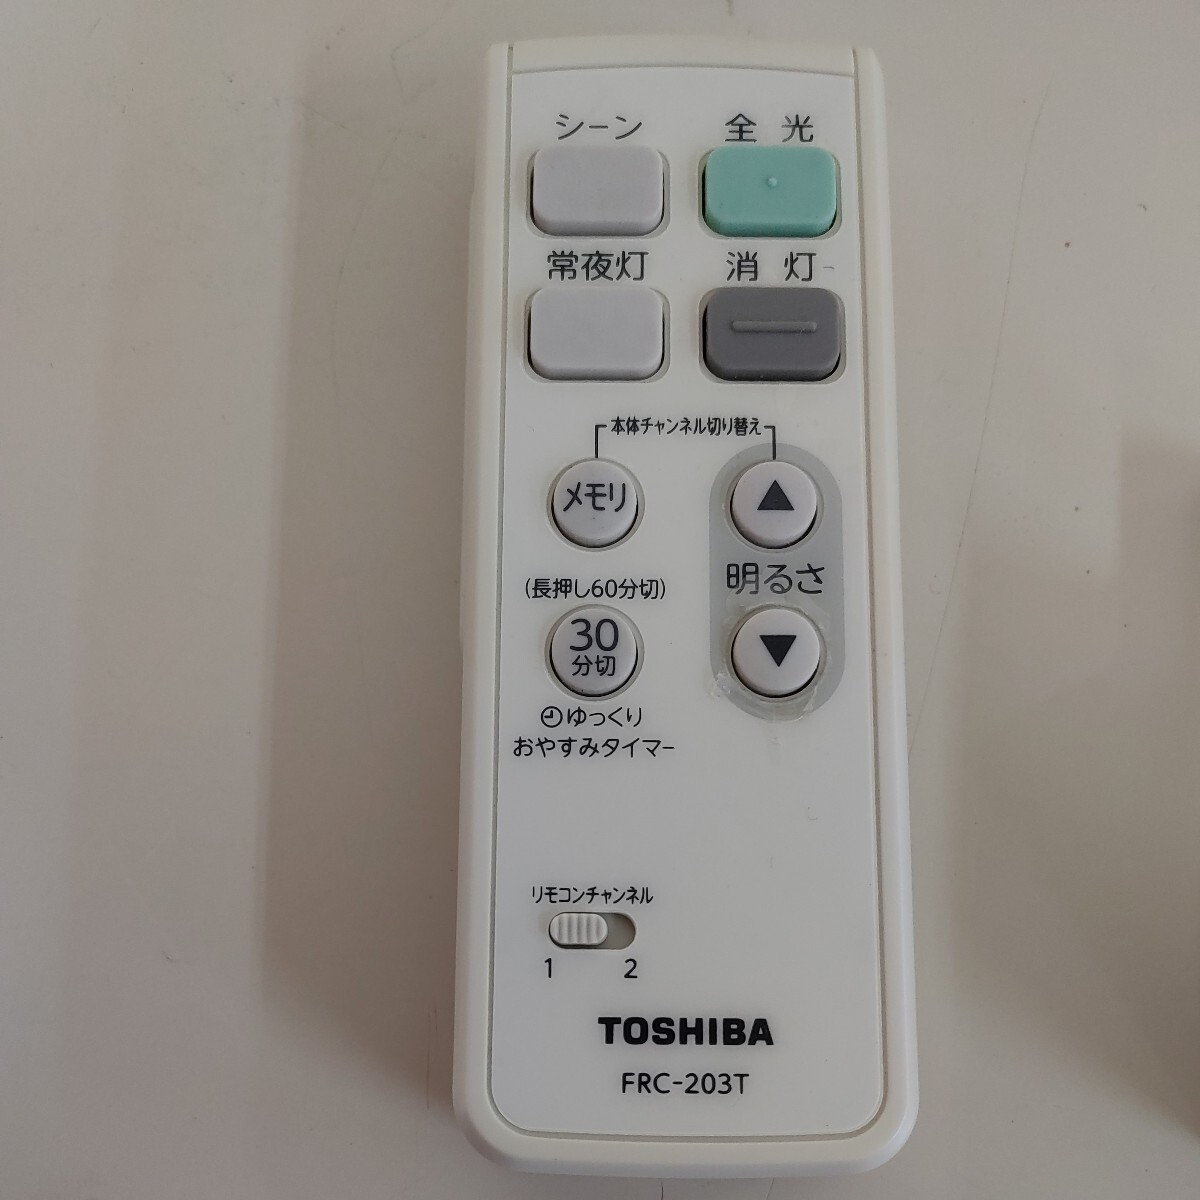 [ Toshiba remote control ceiling light for ] lighting remote control FRC-203T operation verification ending body only secondhand goods TOSHIBA[B3-3①]0506